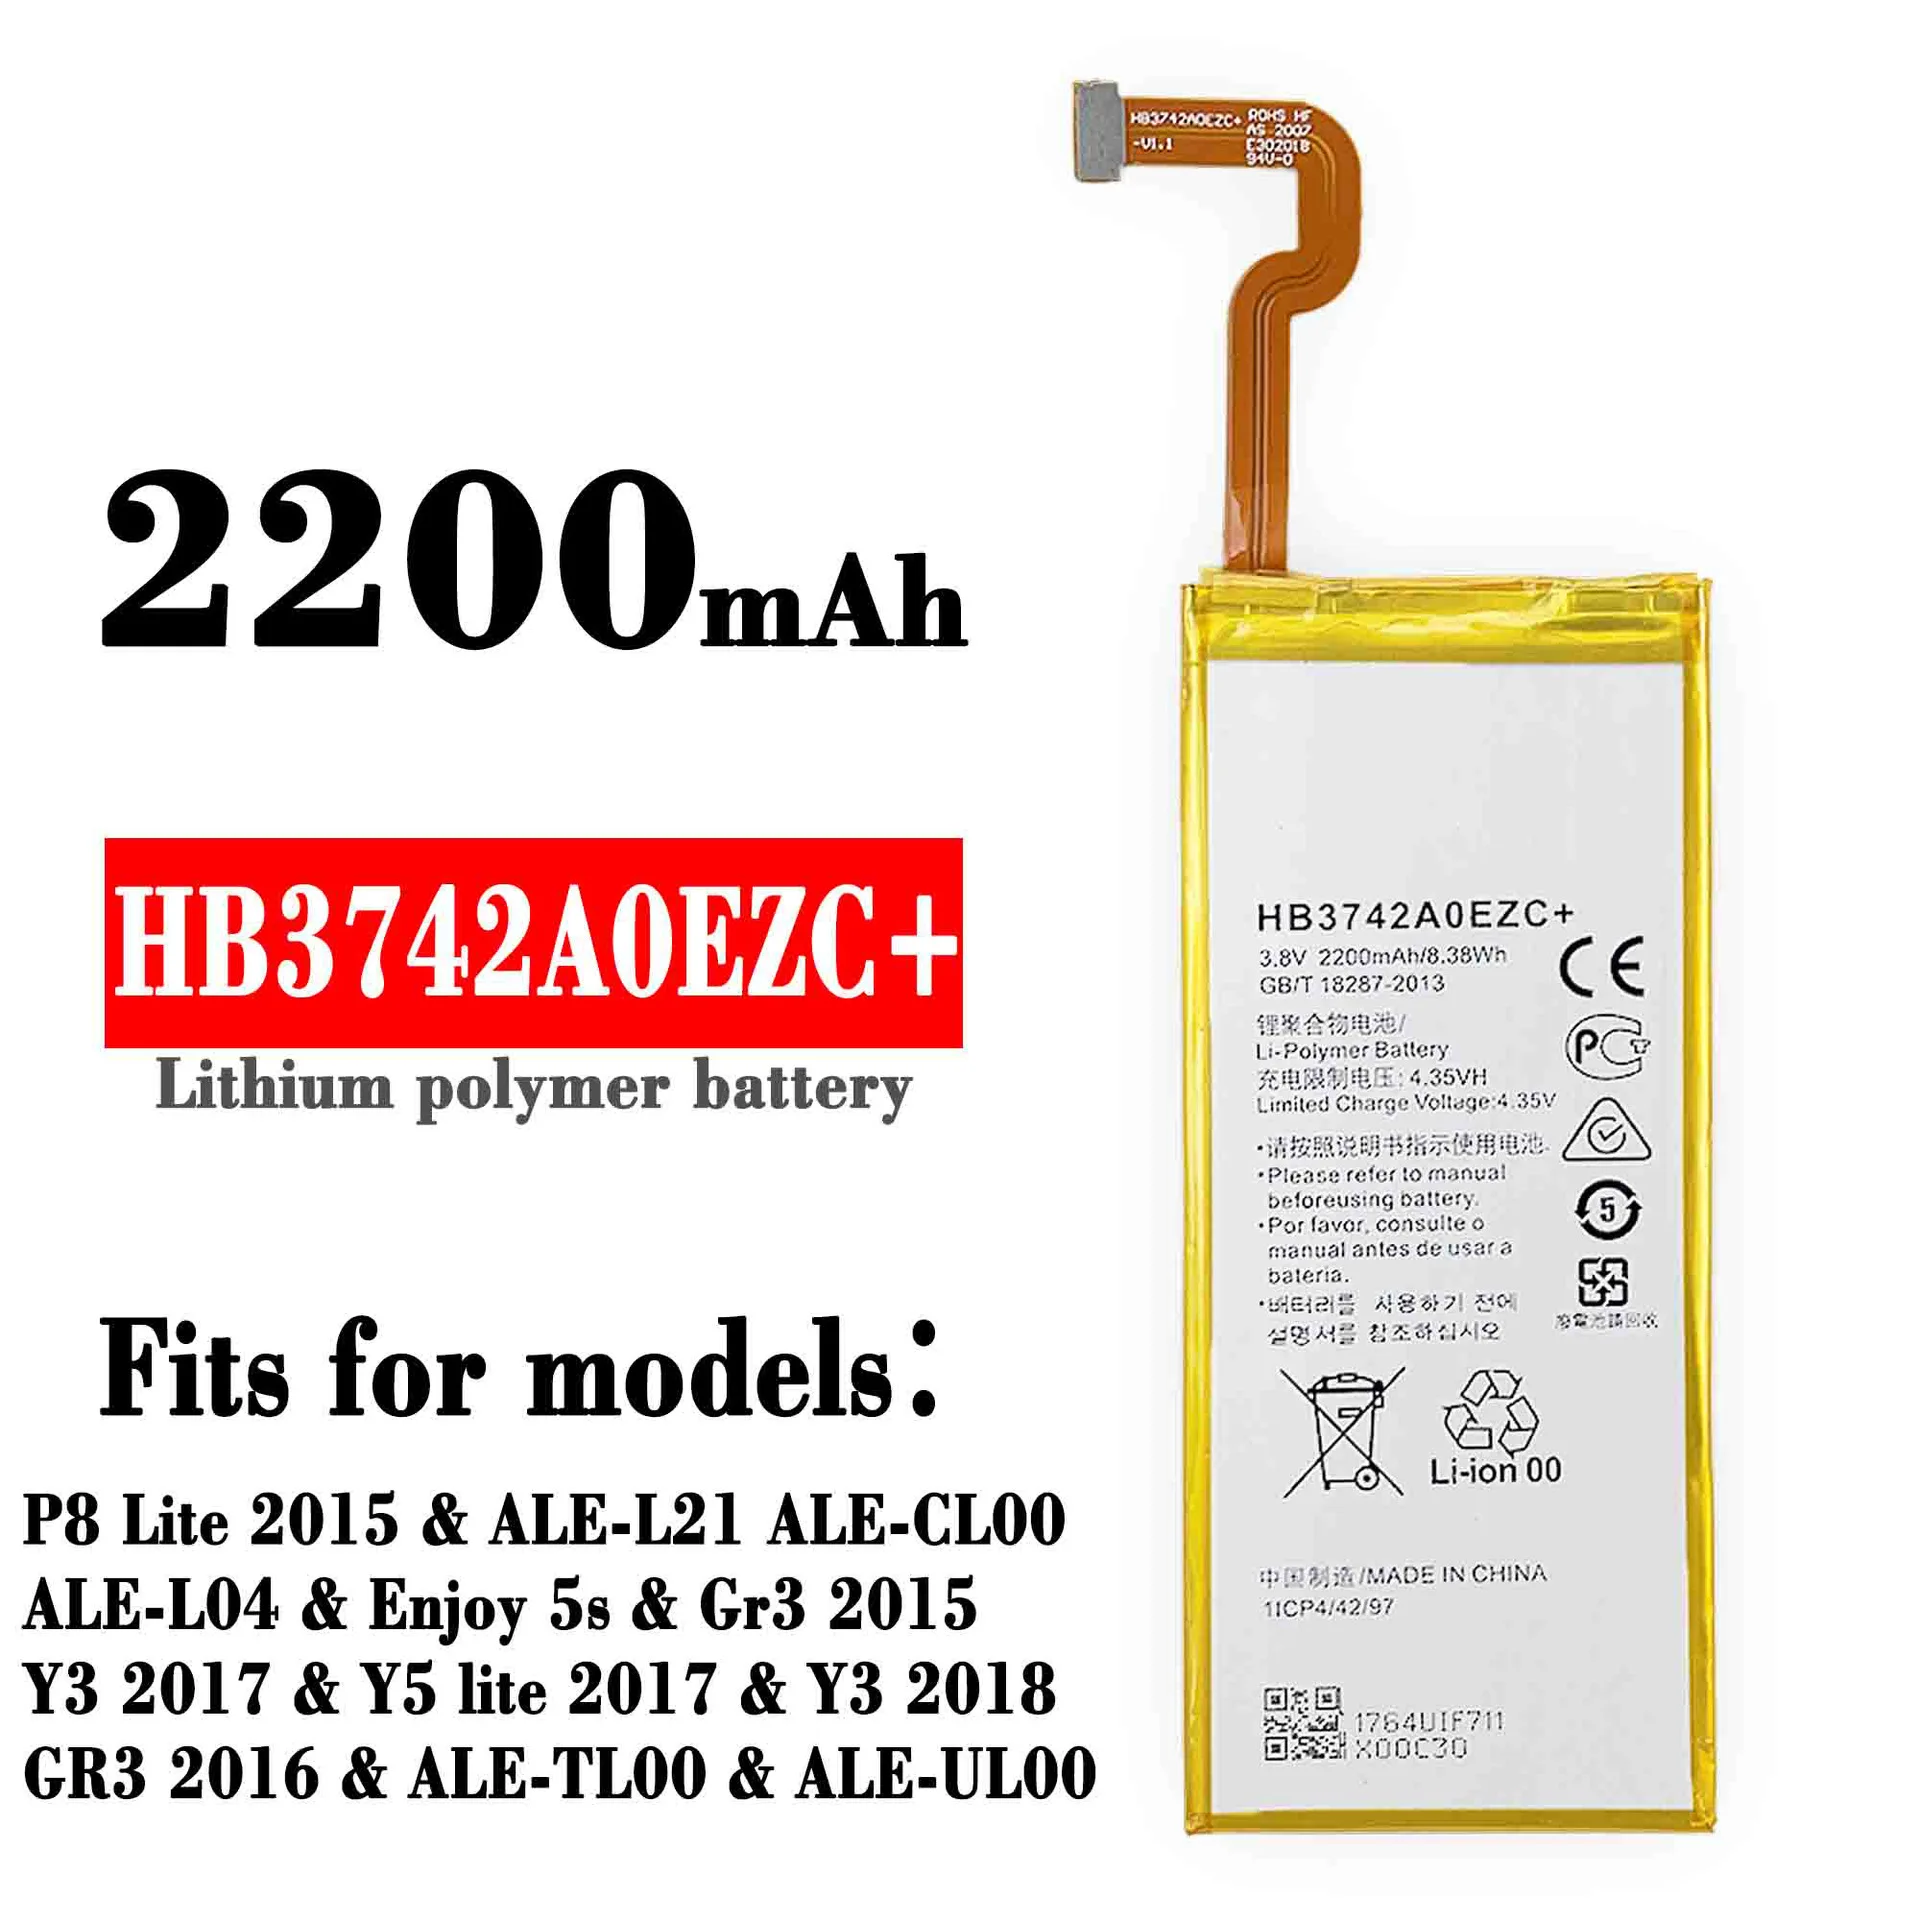 

HB3742A0EZC+ Replacement Battery For Huawei Ascend P8 Lite GR3 Y3 Y5 TAG-L21 Enjoy 5s L03 L13 ALE-L21 ALE-UL00 2200mAh Bateria